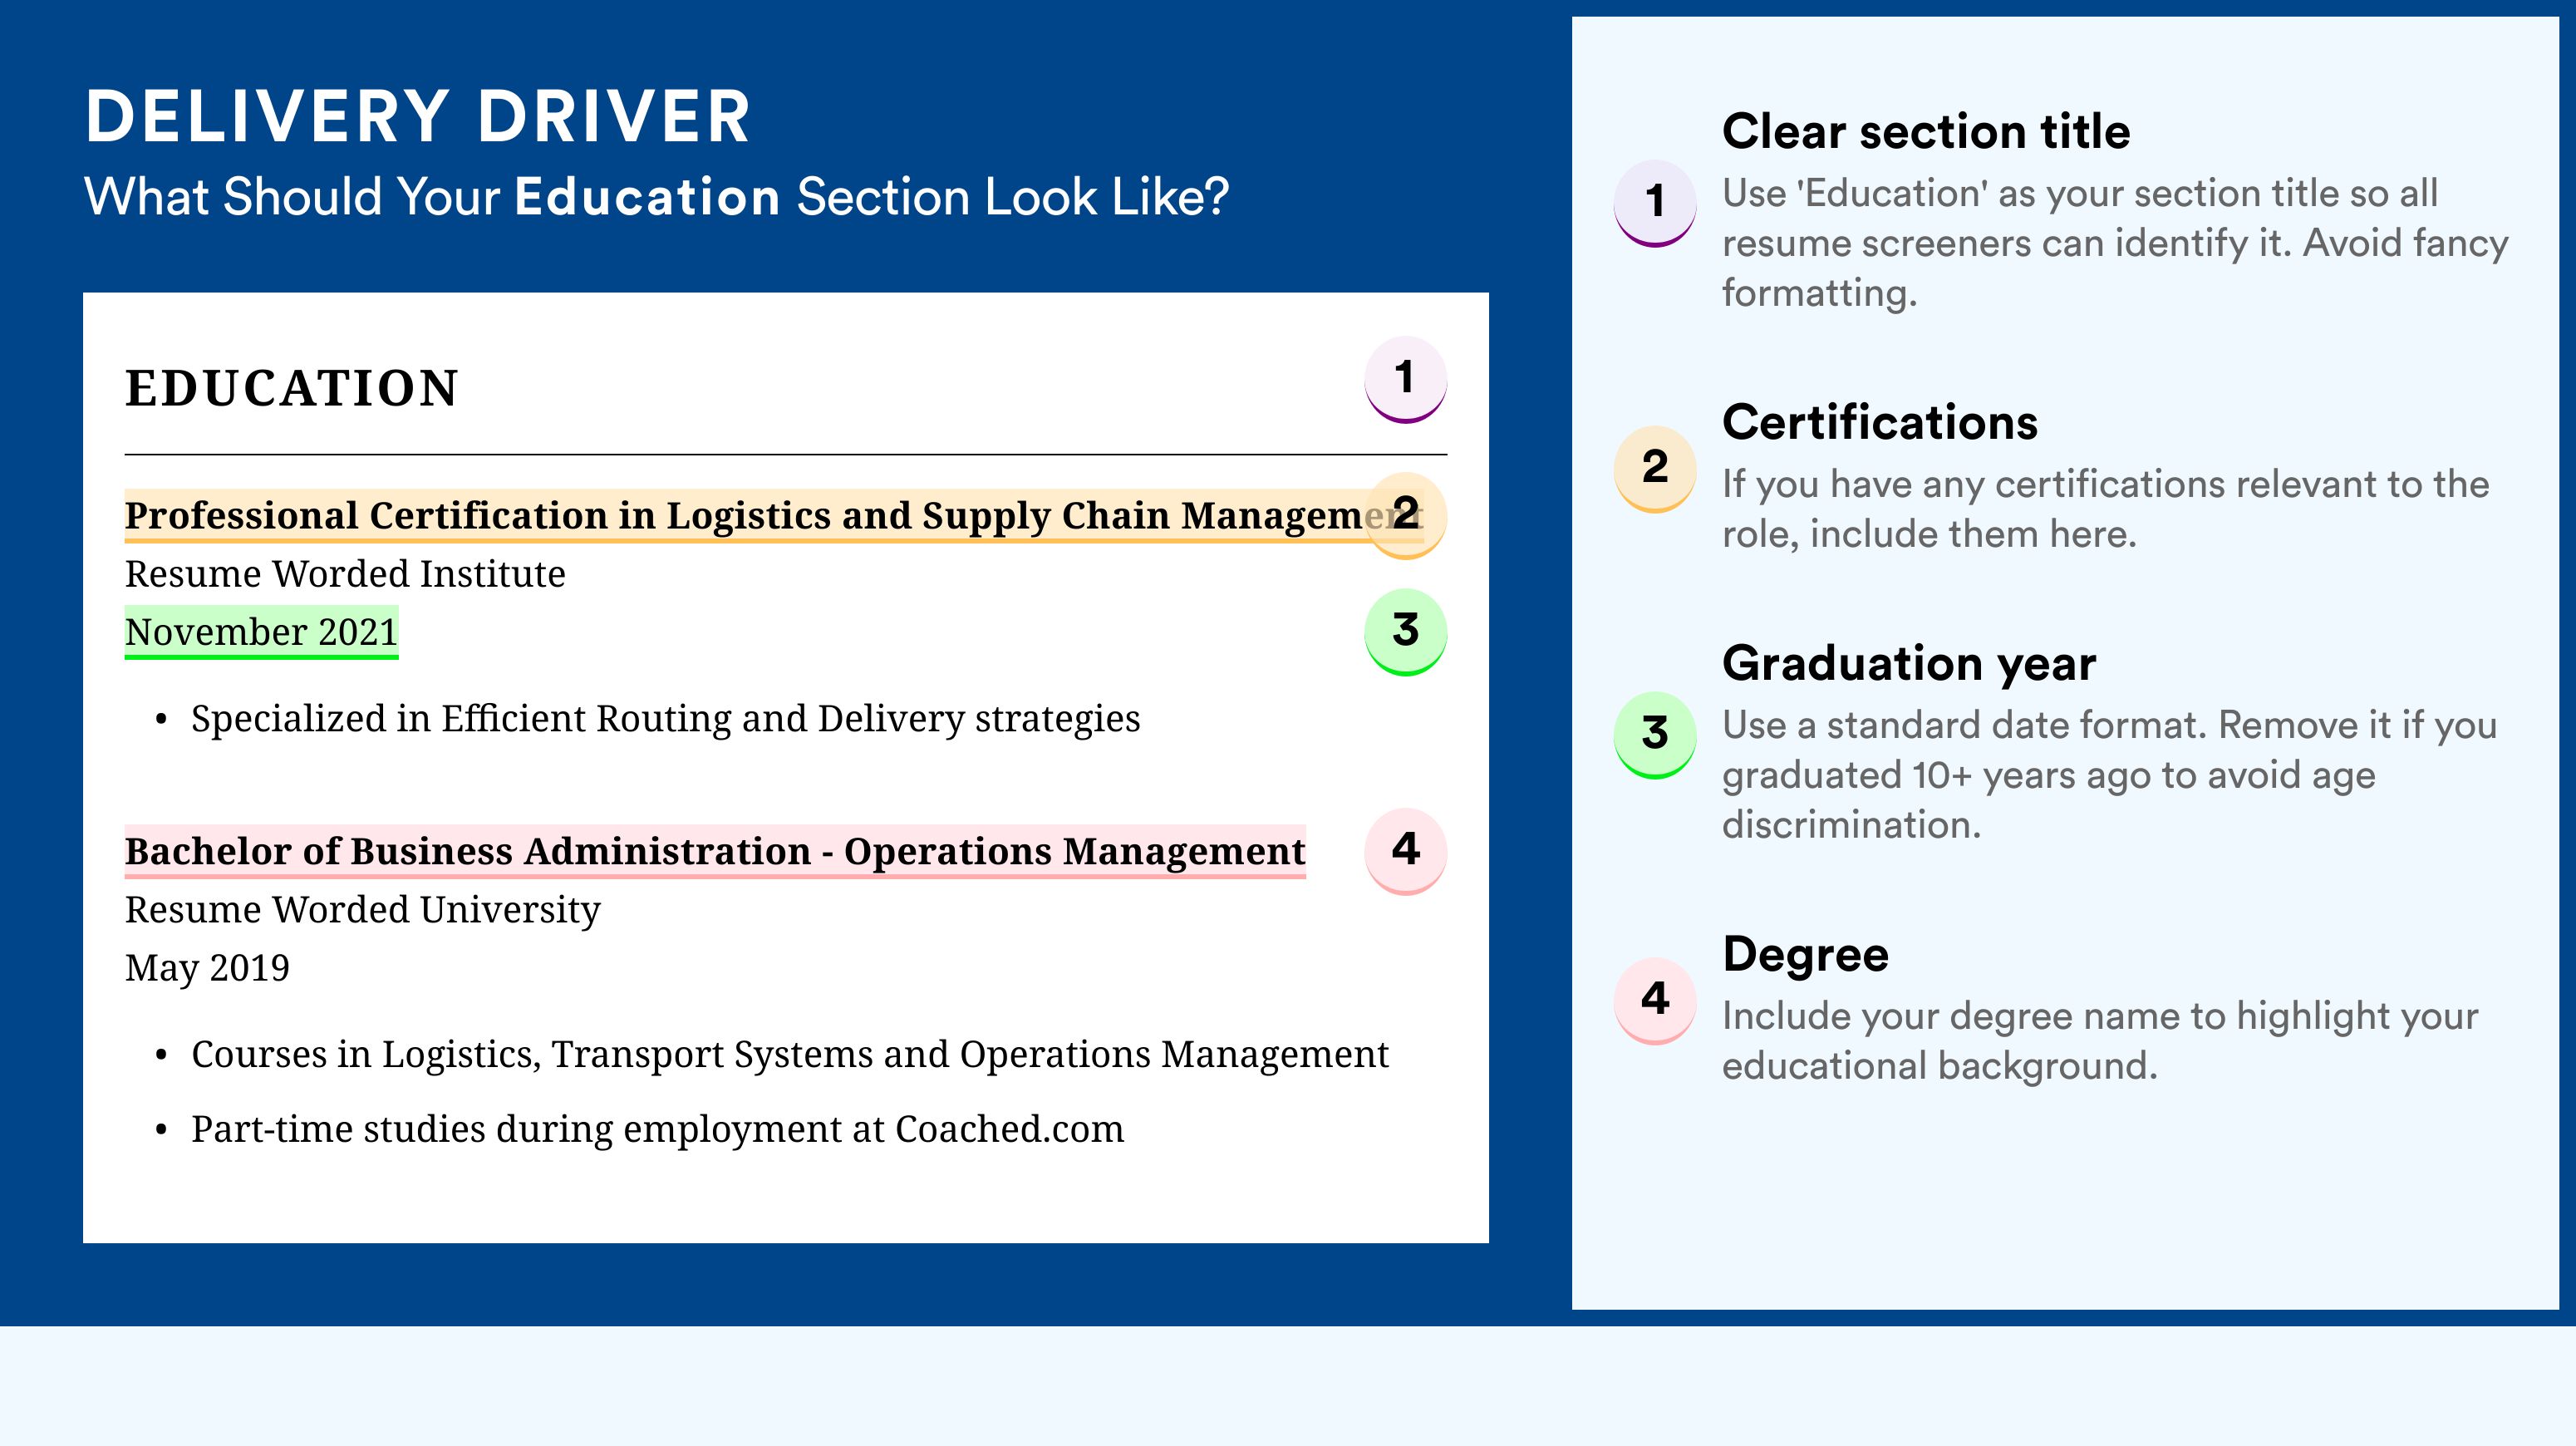 How To Write An Education Section - Delivery Driver Roles